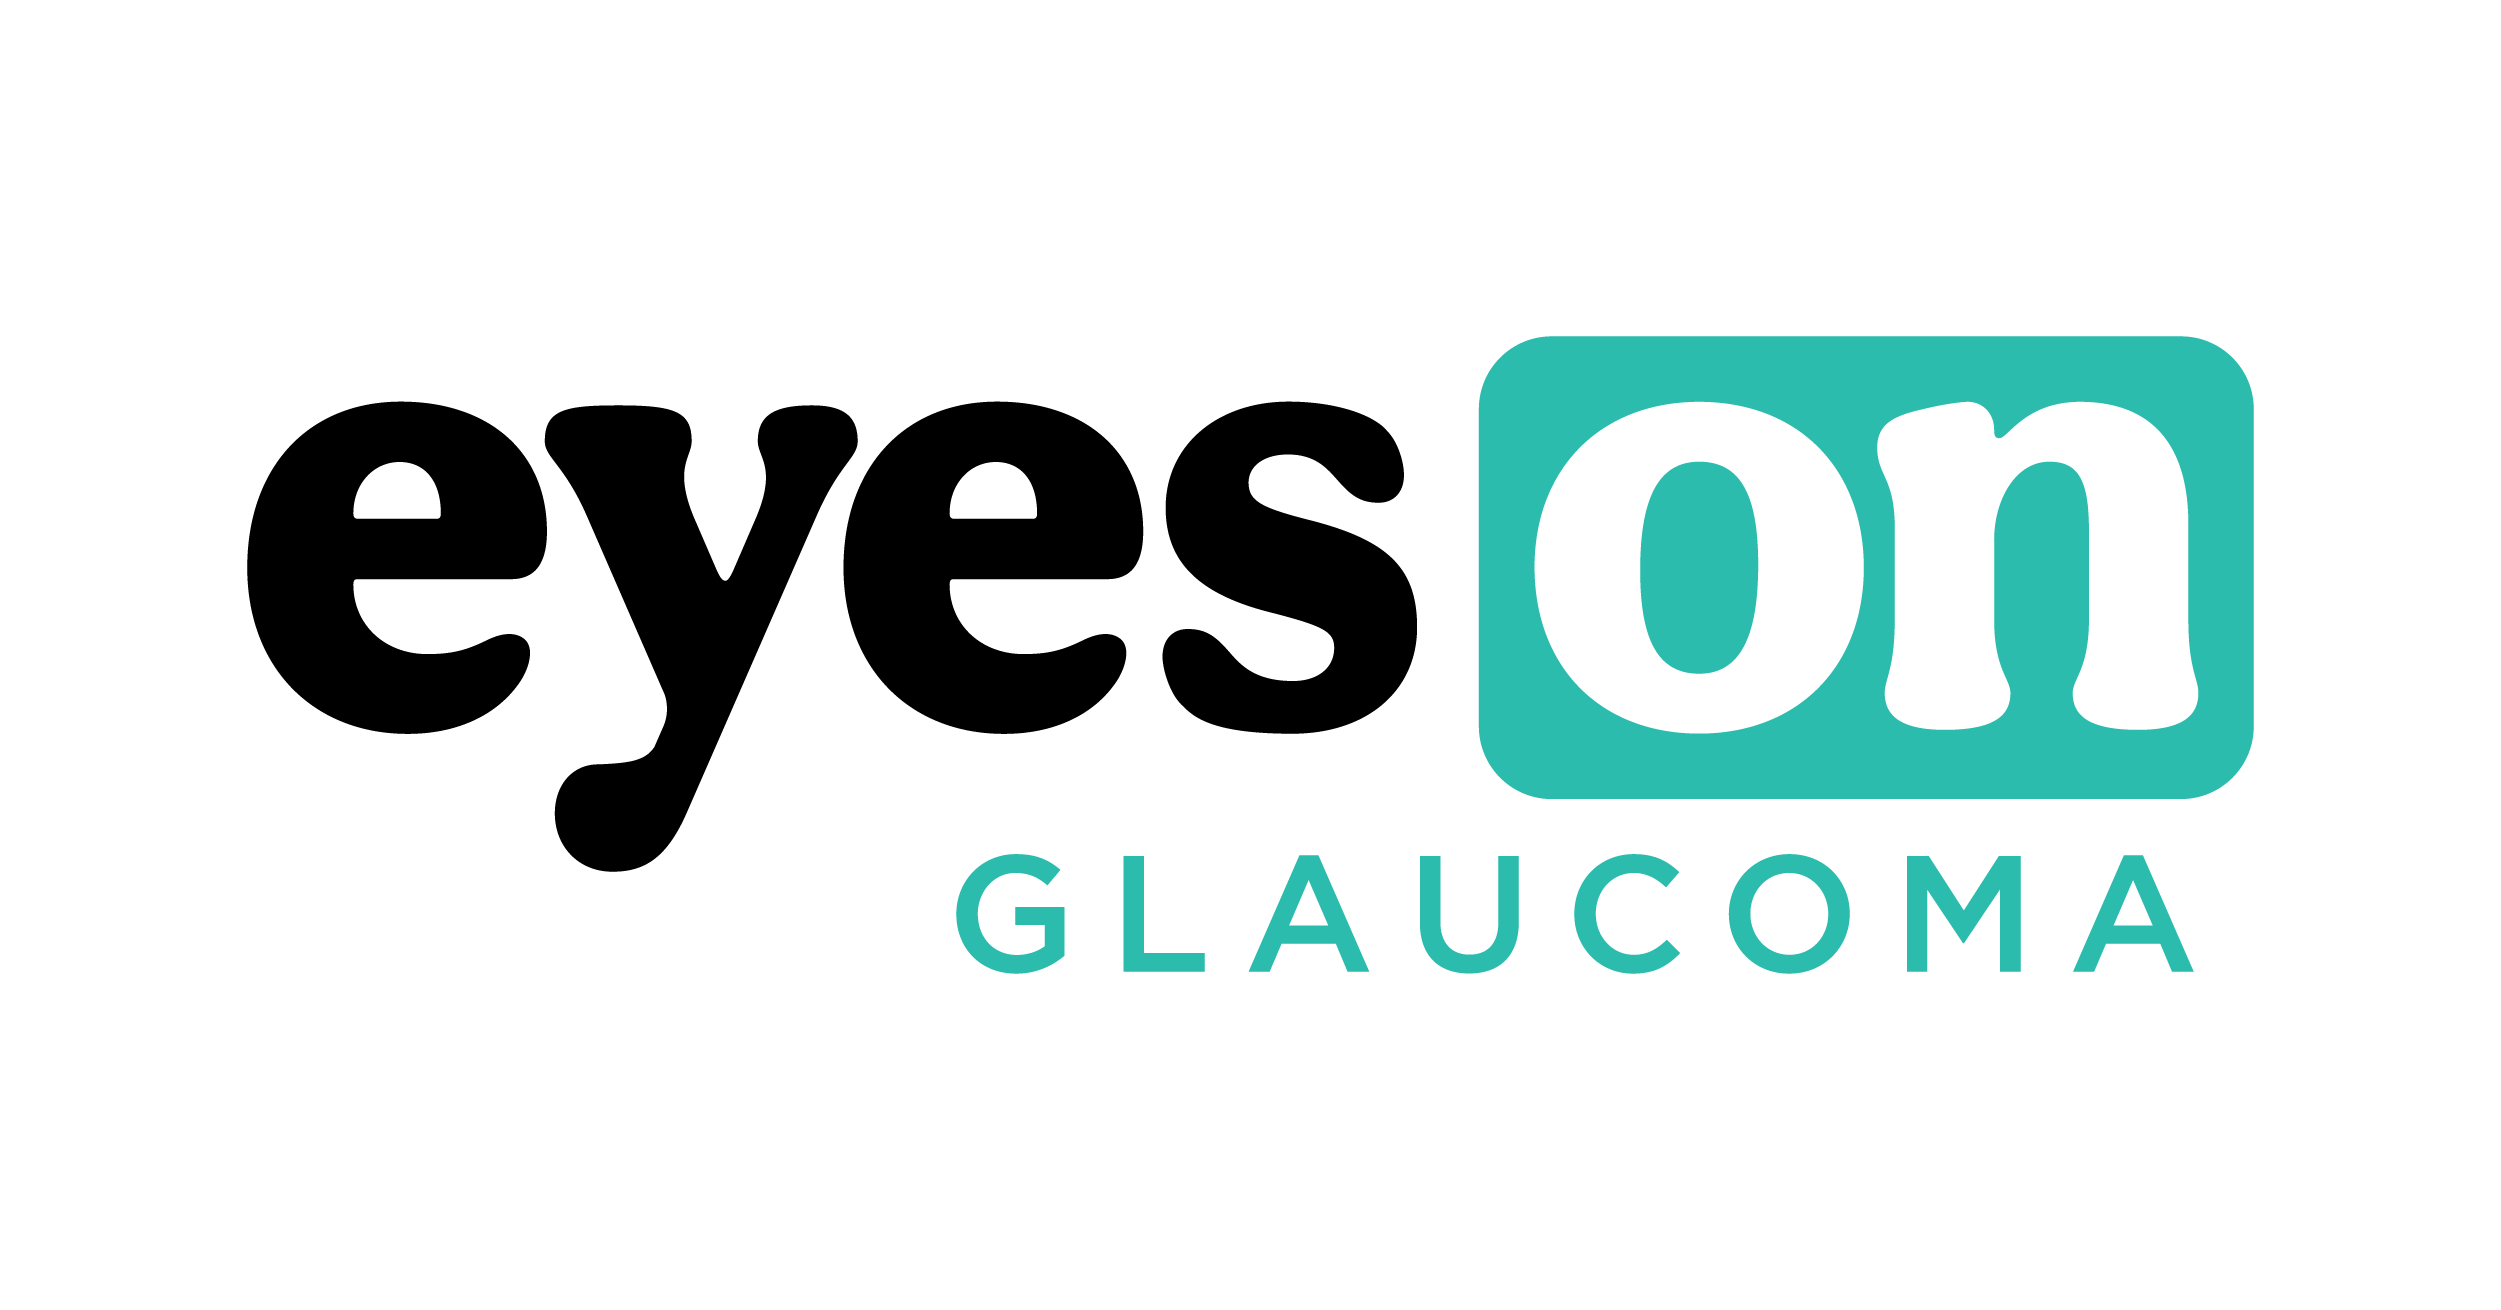 Nearly 4,000 ECPs Attend Eyes On Glaucoma 2021